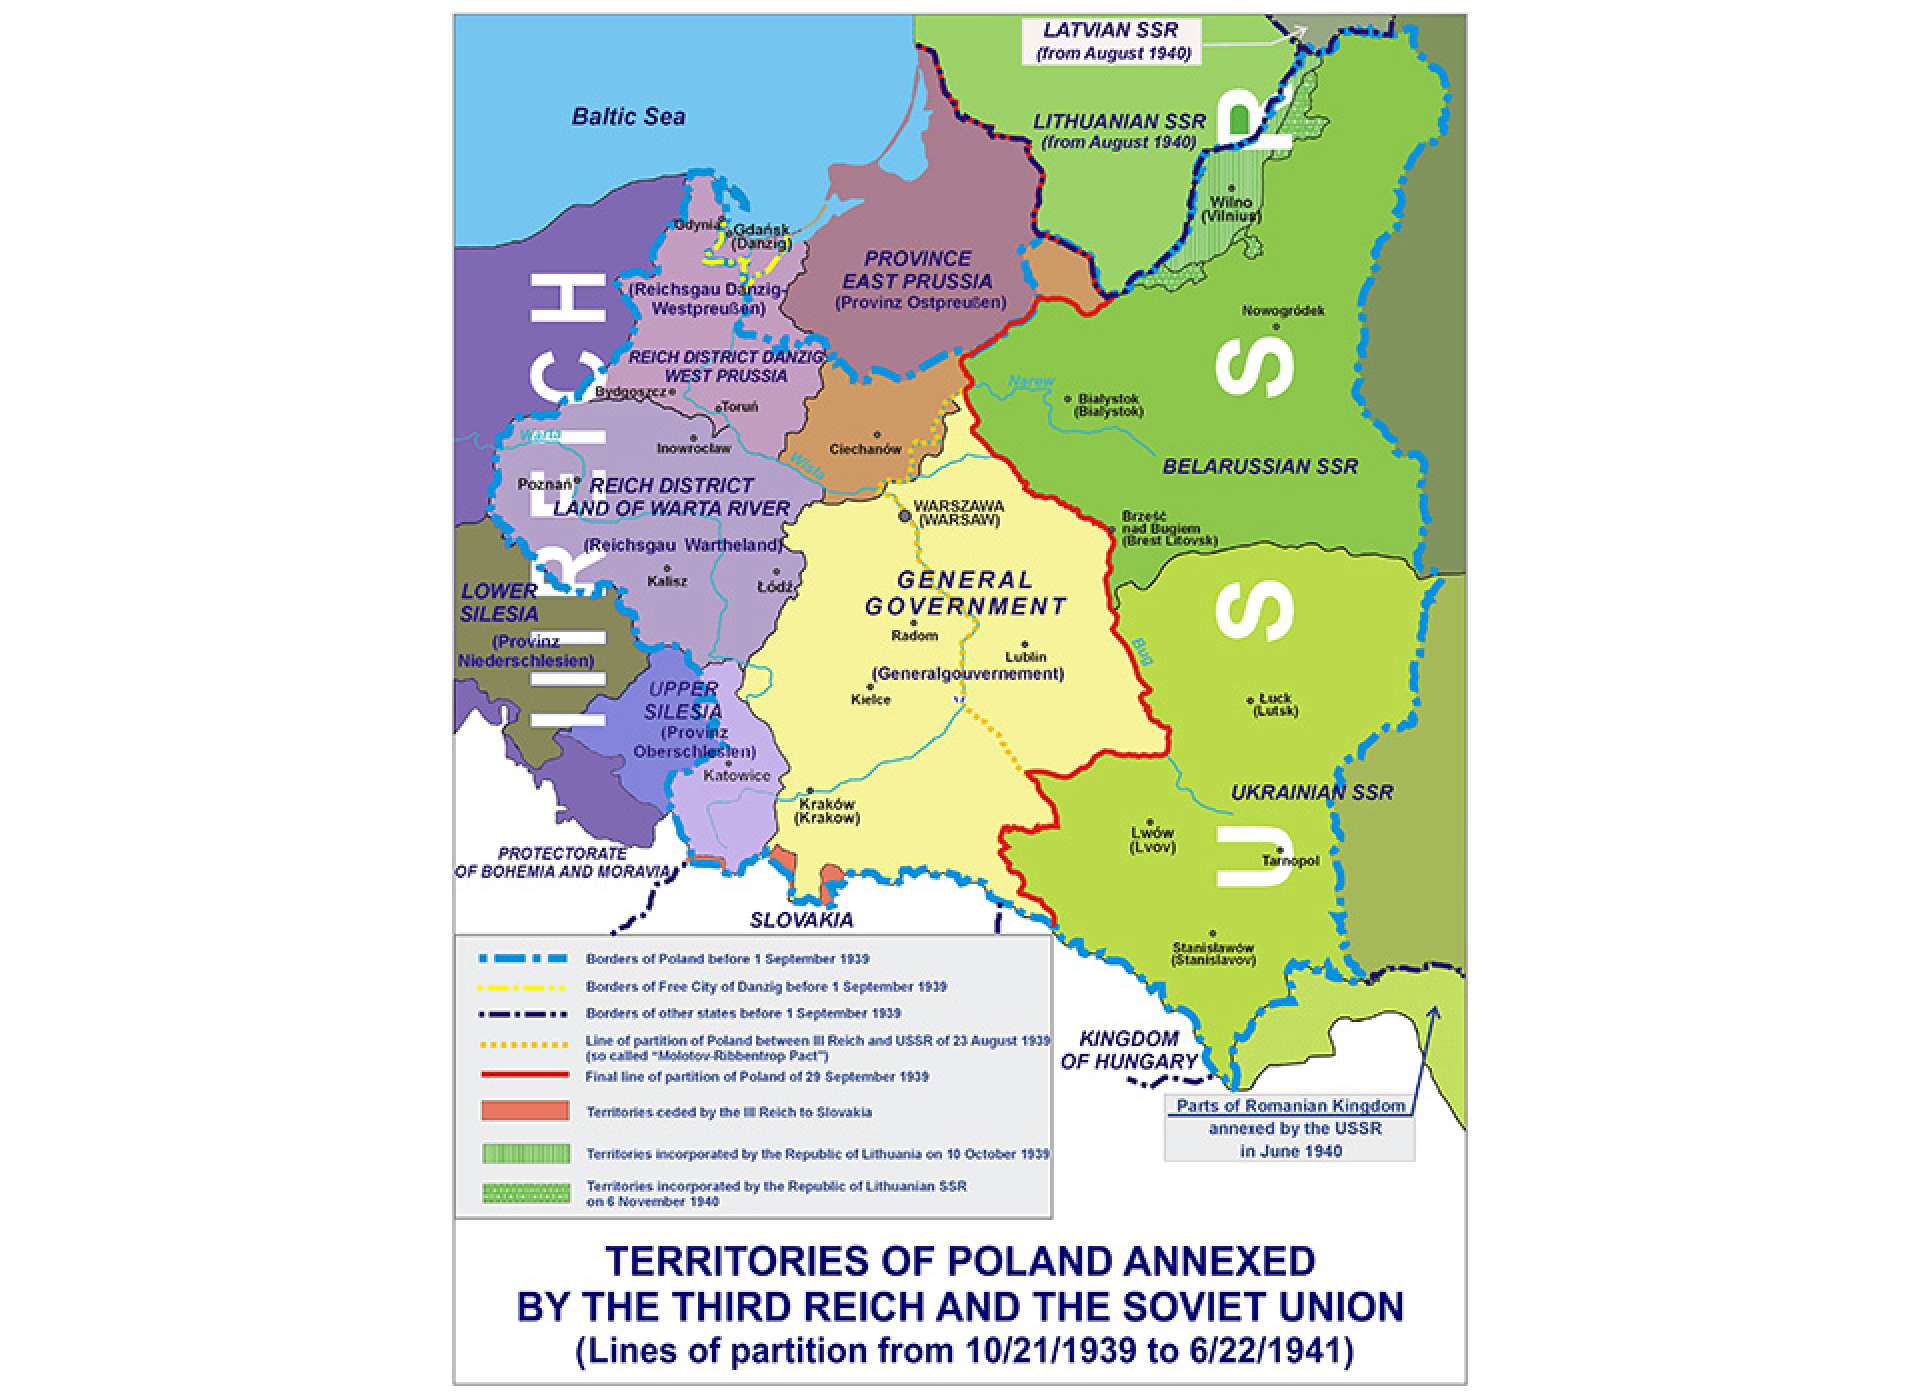 Poland occupied by Nazi Germany and USSR